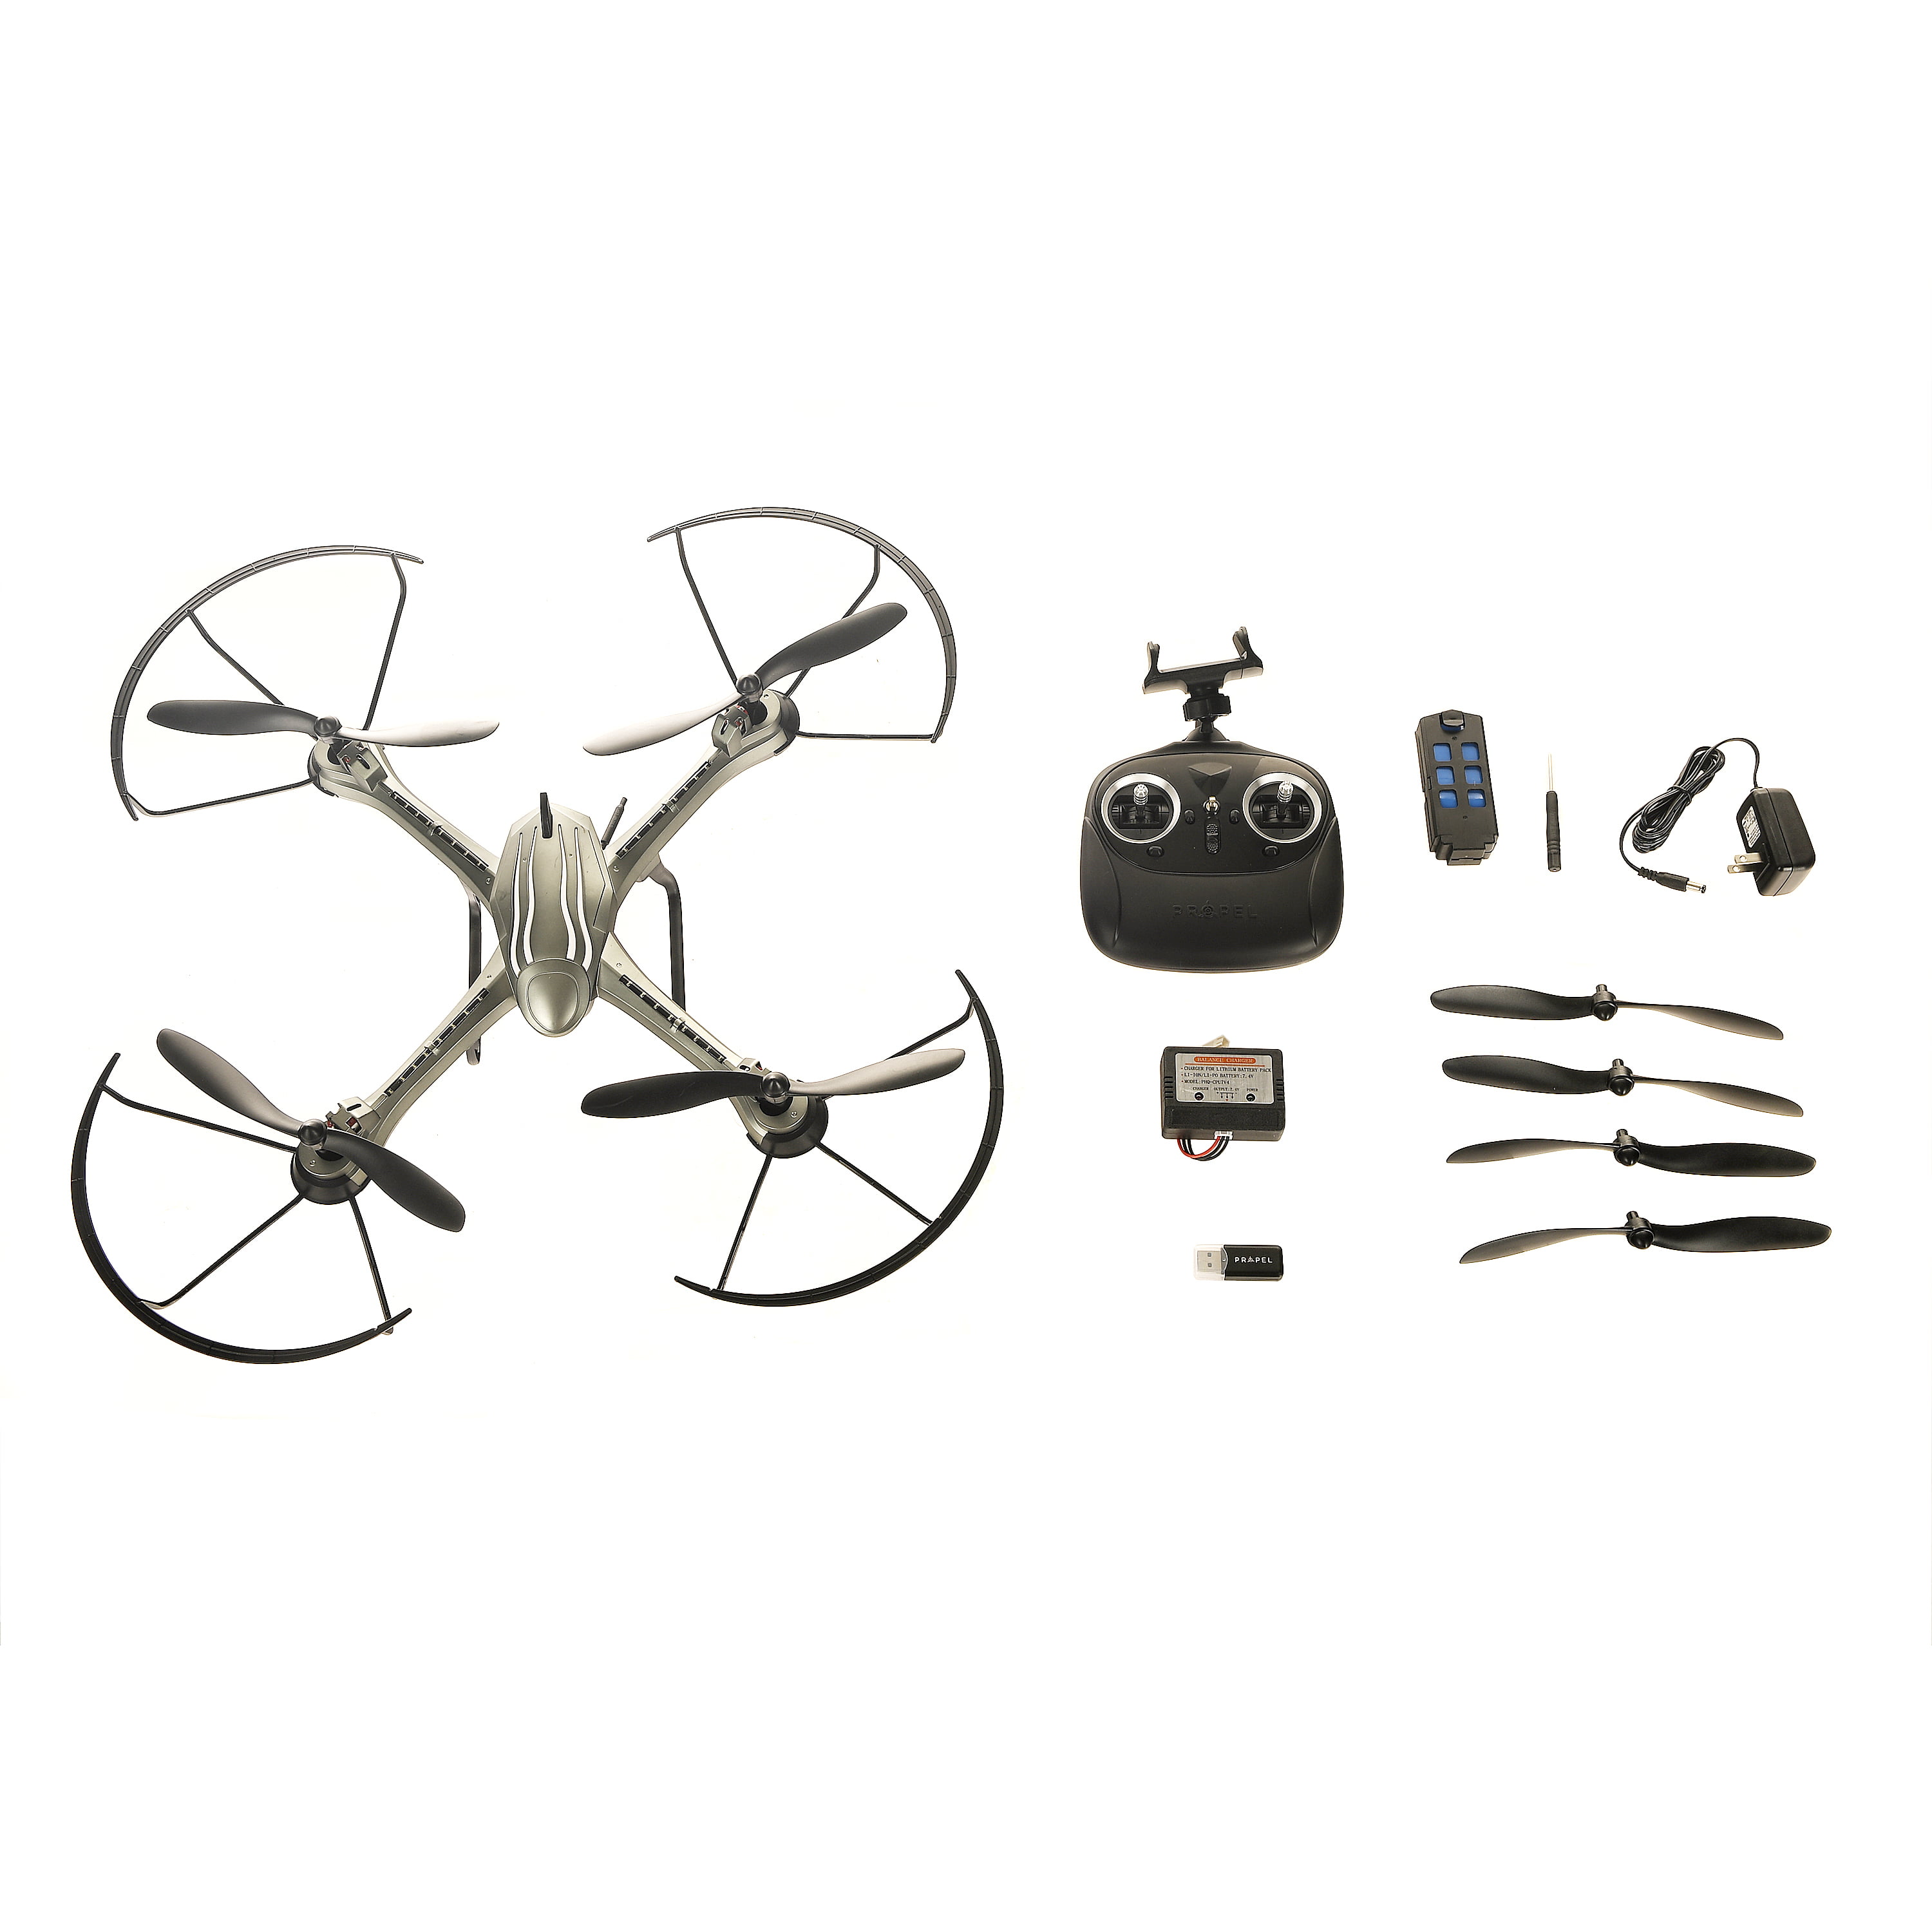 Propel Maximum X15 Drone Instructions - Picture Of Drone